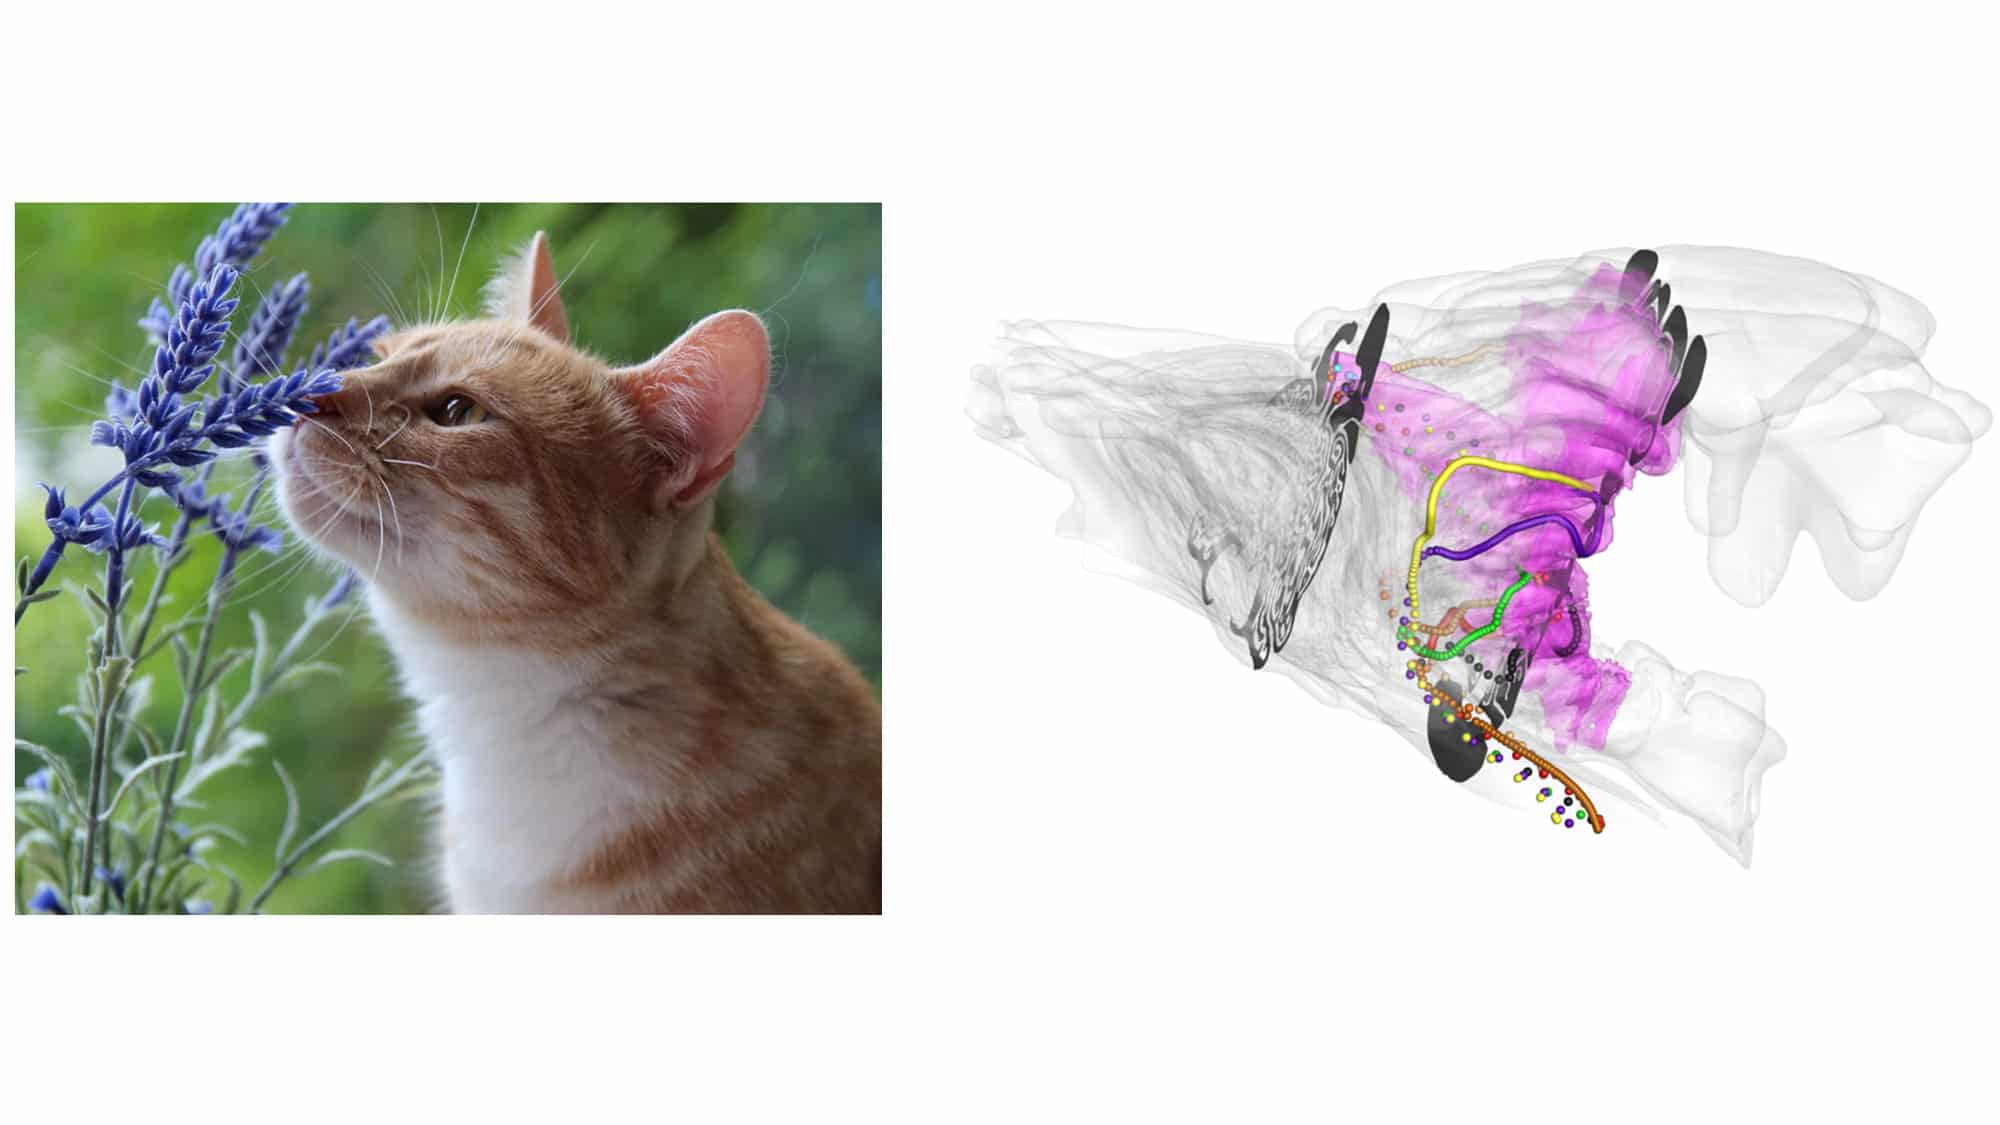 3D model to find that house cats’ noses